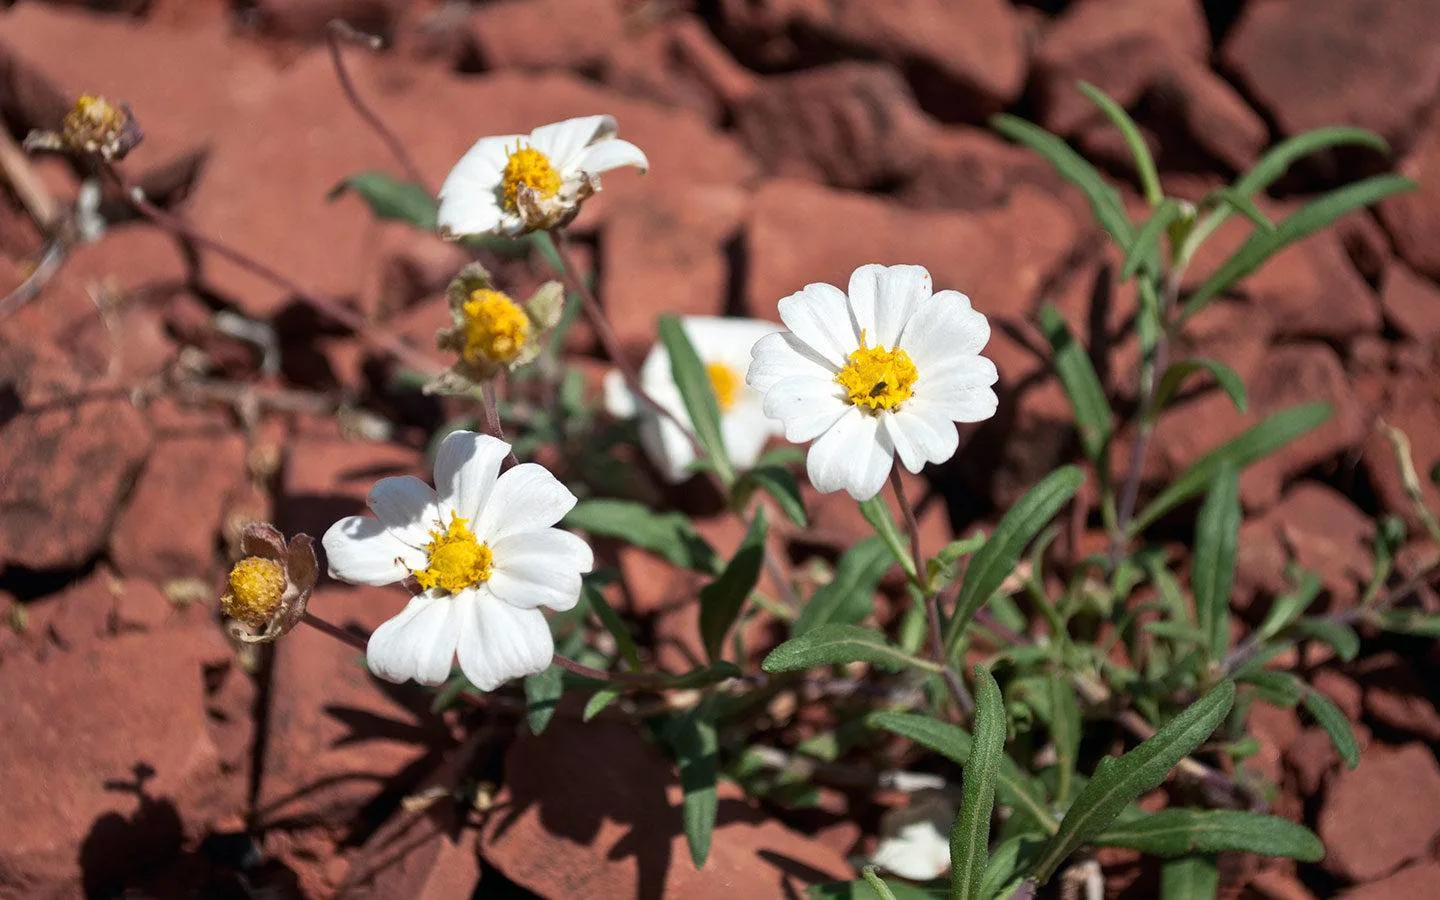 Red rocks and white flowers in Arizona, southwest USA